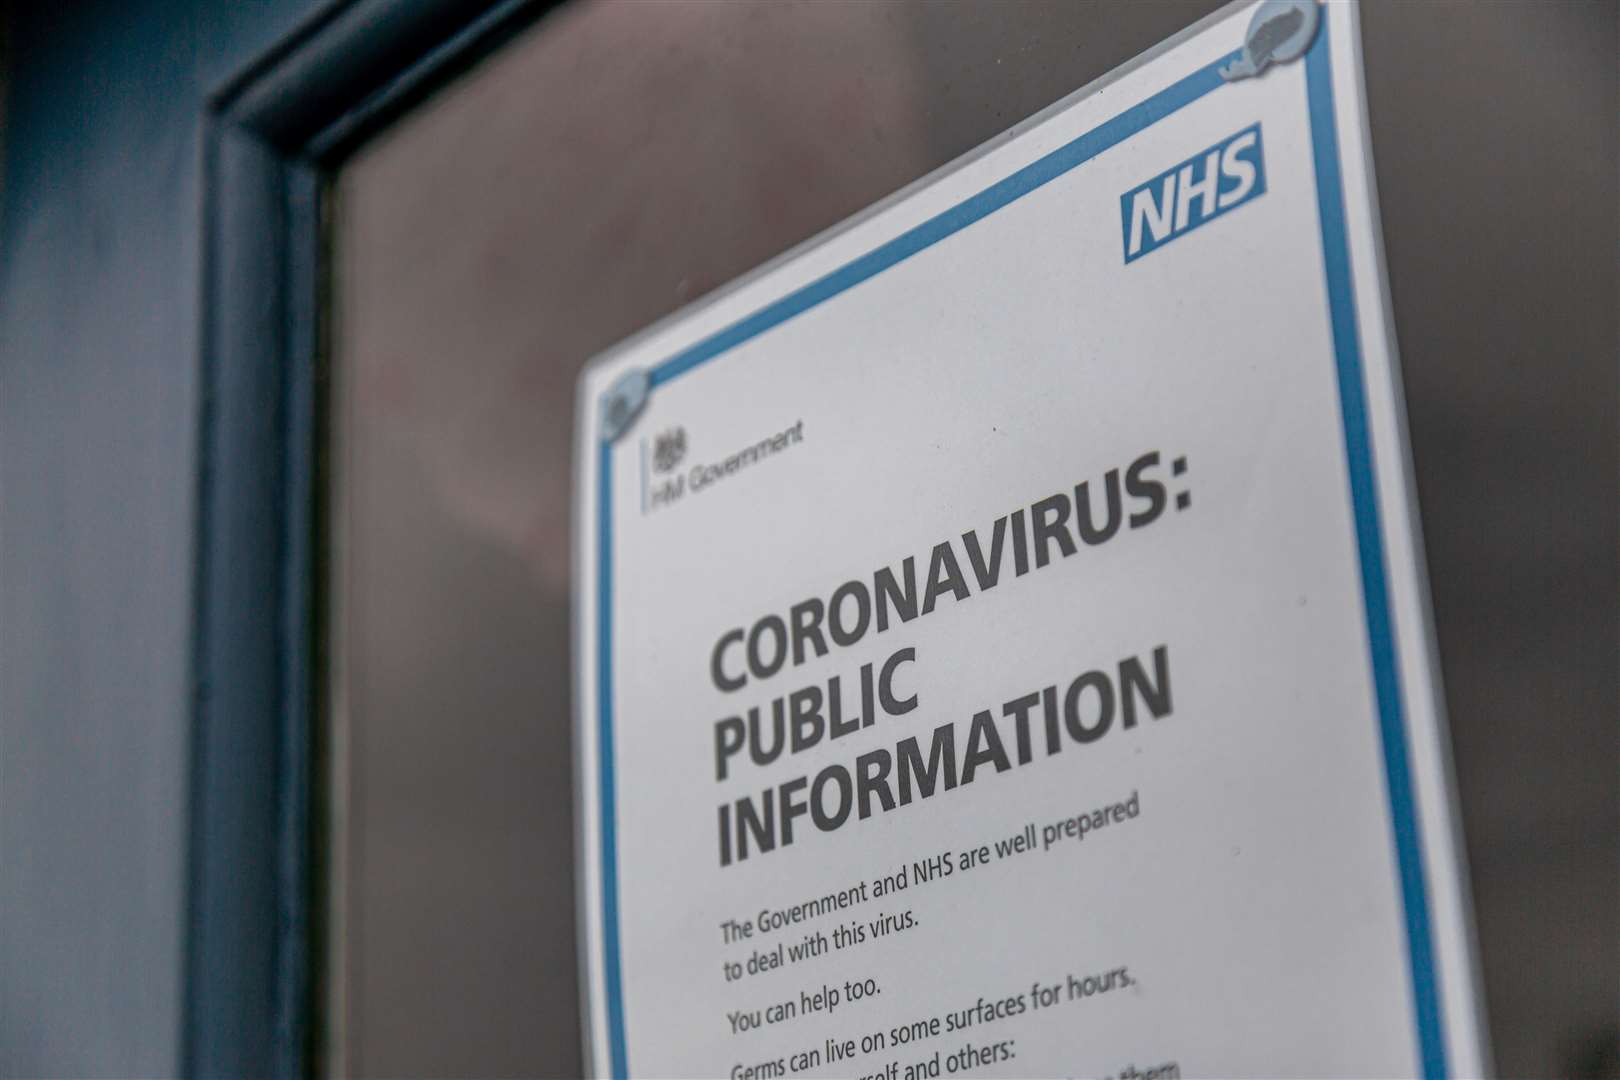 Hospital bosses have reassured patients there are systems to isolate coronavirus and ensure routine treatments can continue